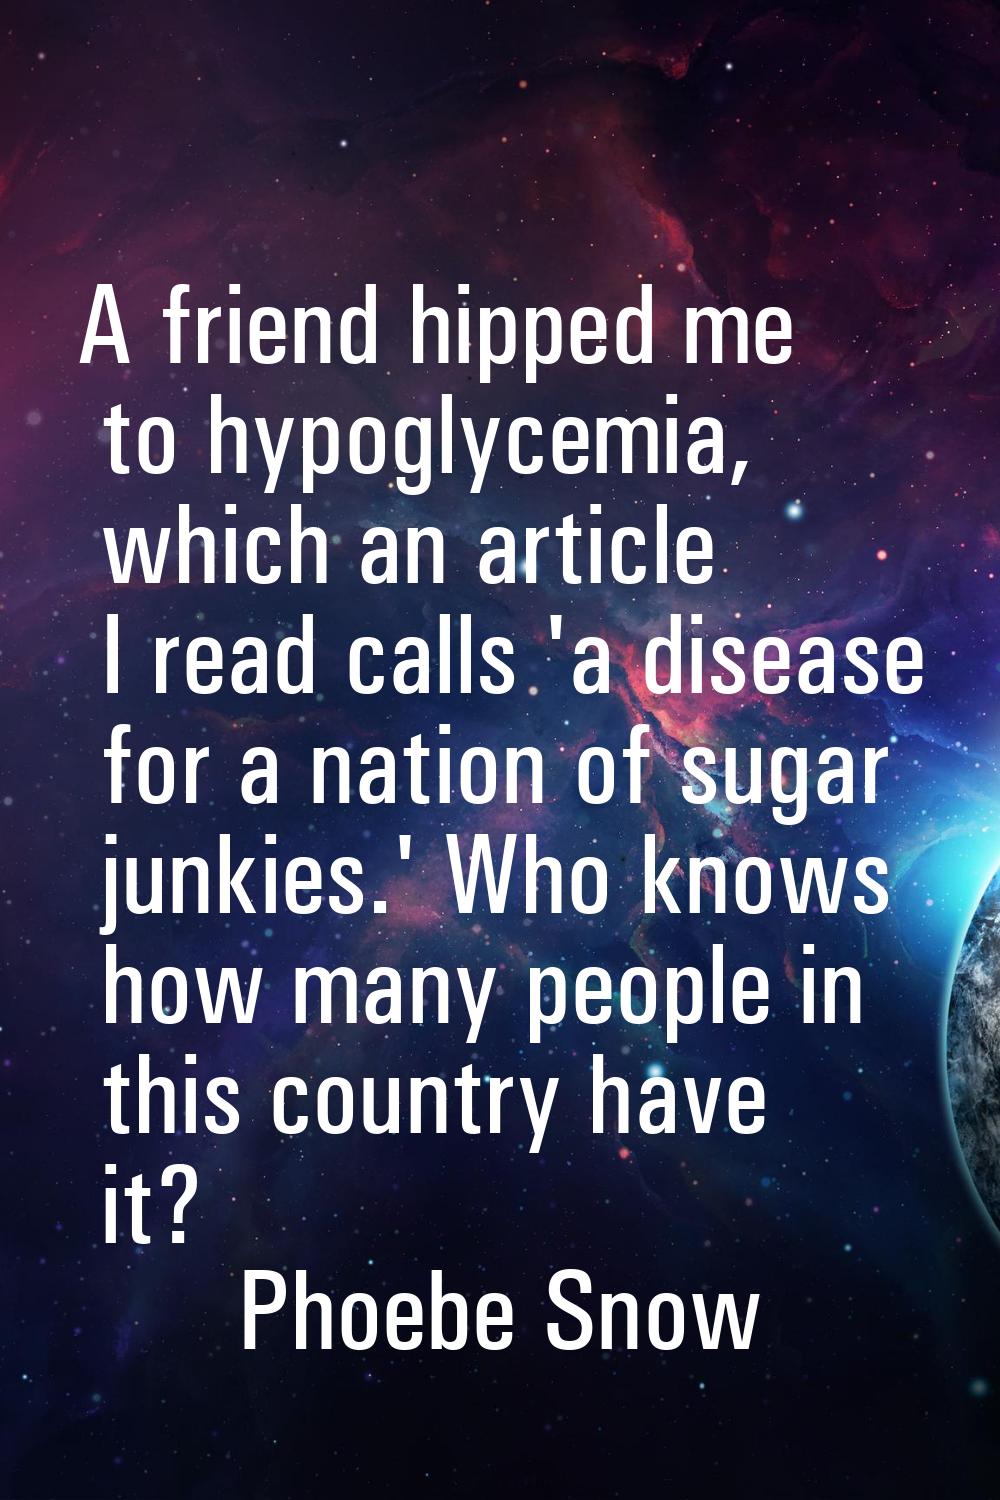 A friend hipped me to hypoglycemia, which an article I read calls 'a disease for a nation of sugar 